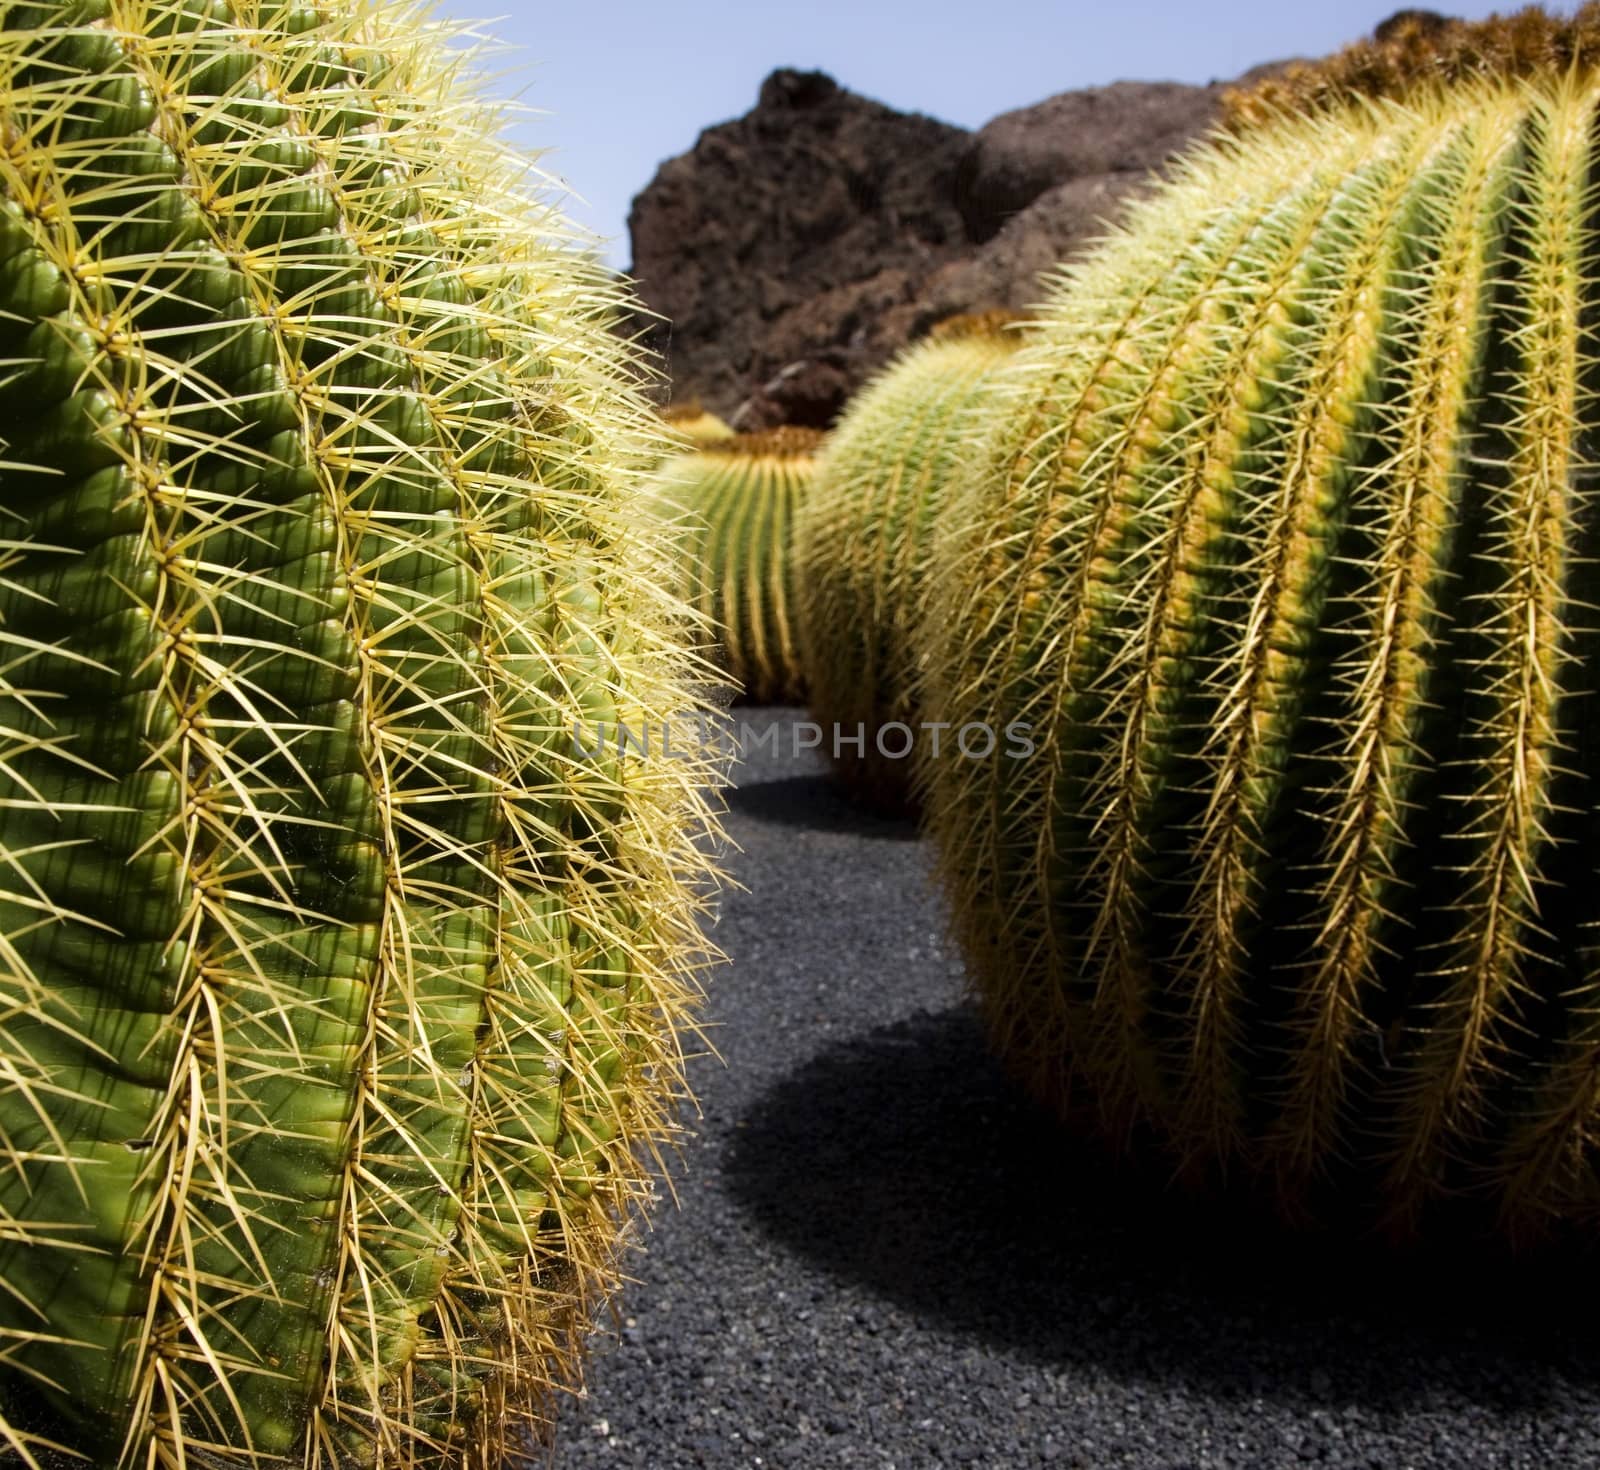 Cactus scenary with spherical cactus including black land and blue sky.